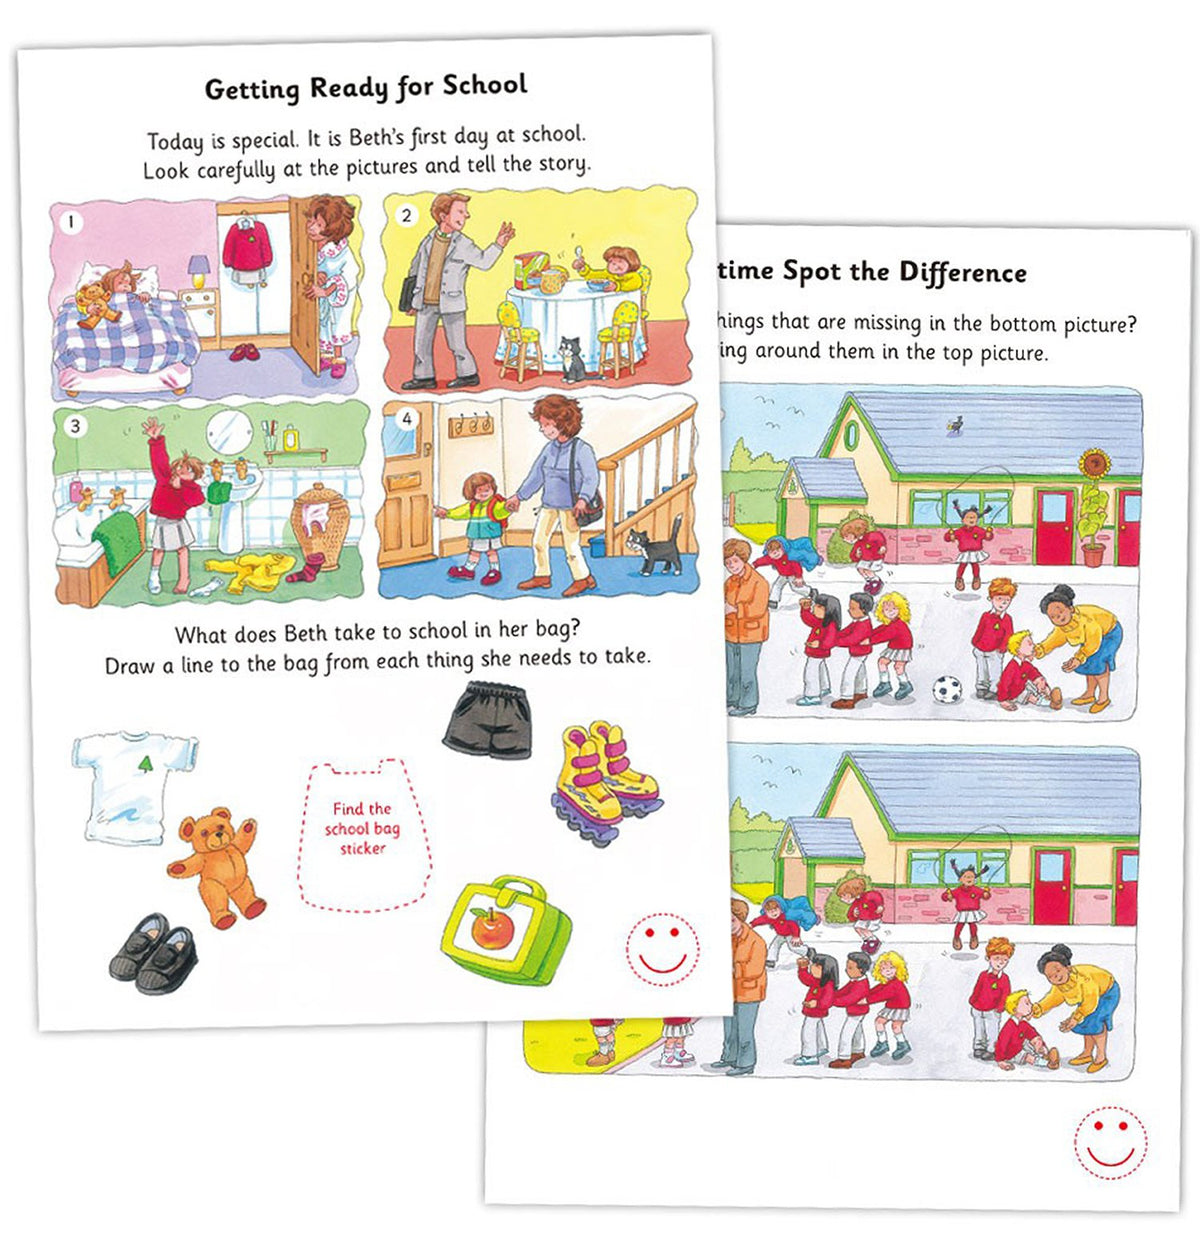 Home Learning Books - Early Activities - Galt